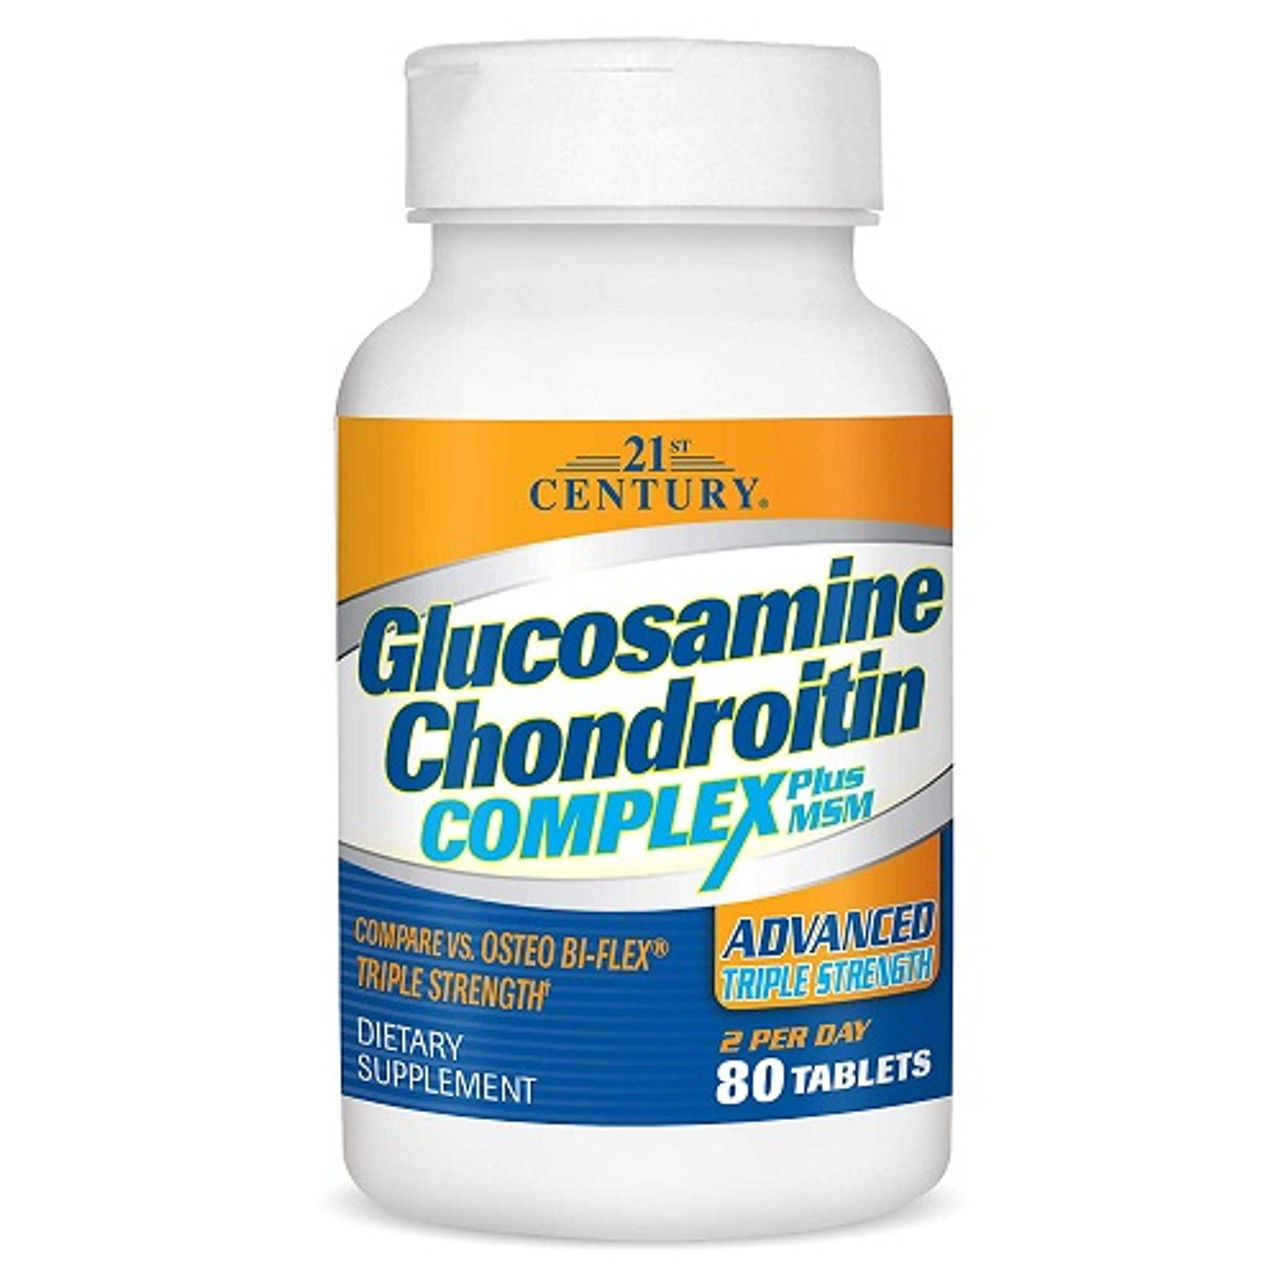 Move Free Glucosamine Chondroitin MSM & Vitamin D3 - Joint Health (80  Tablets) by Schiff Products at the Vitamin Shoppe